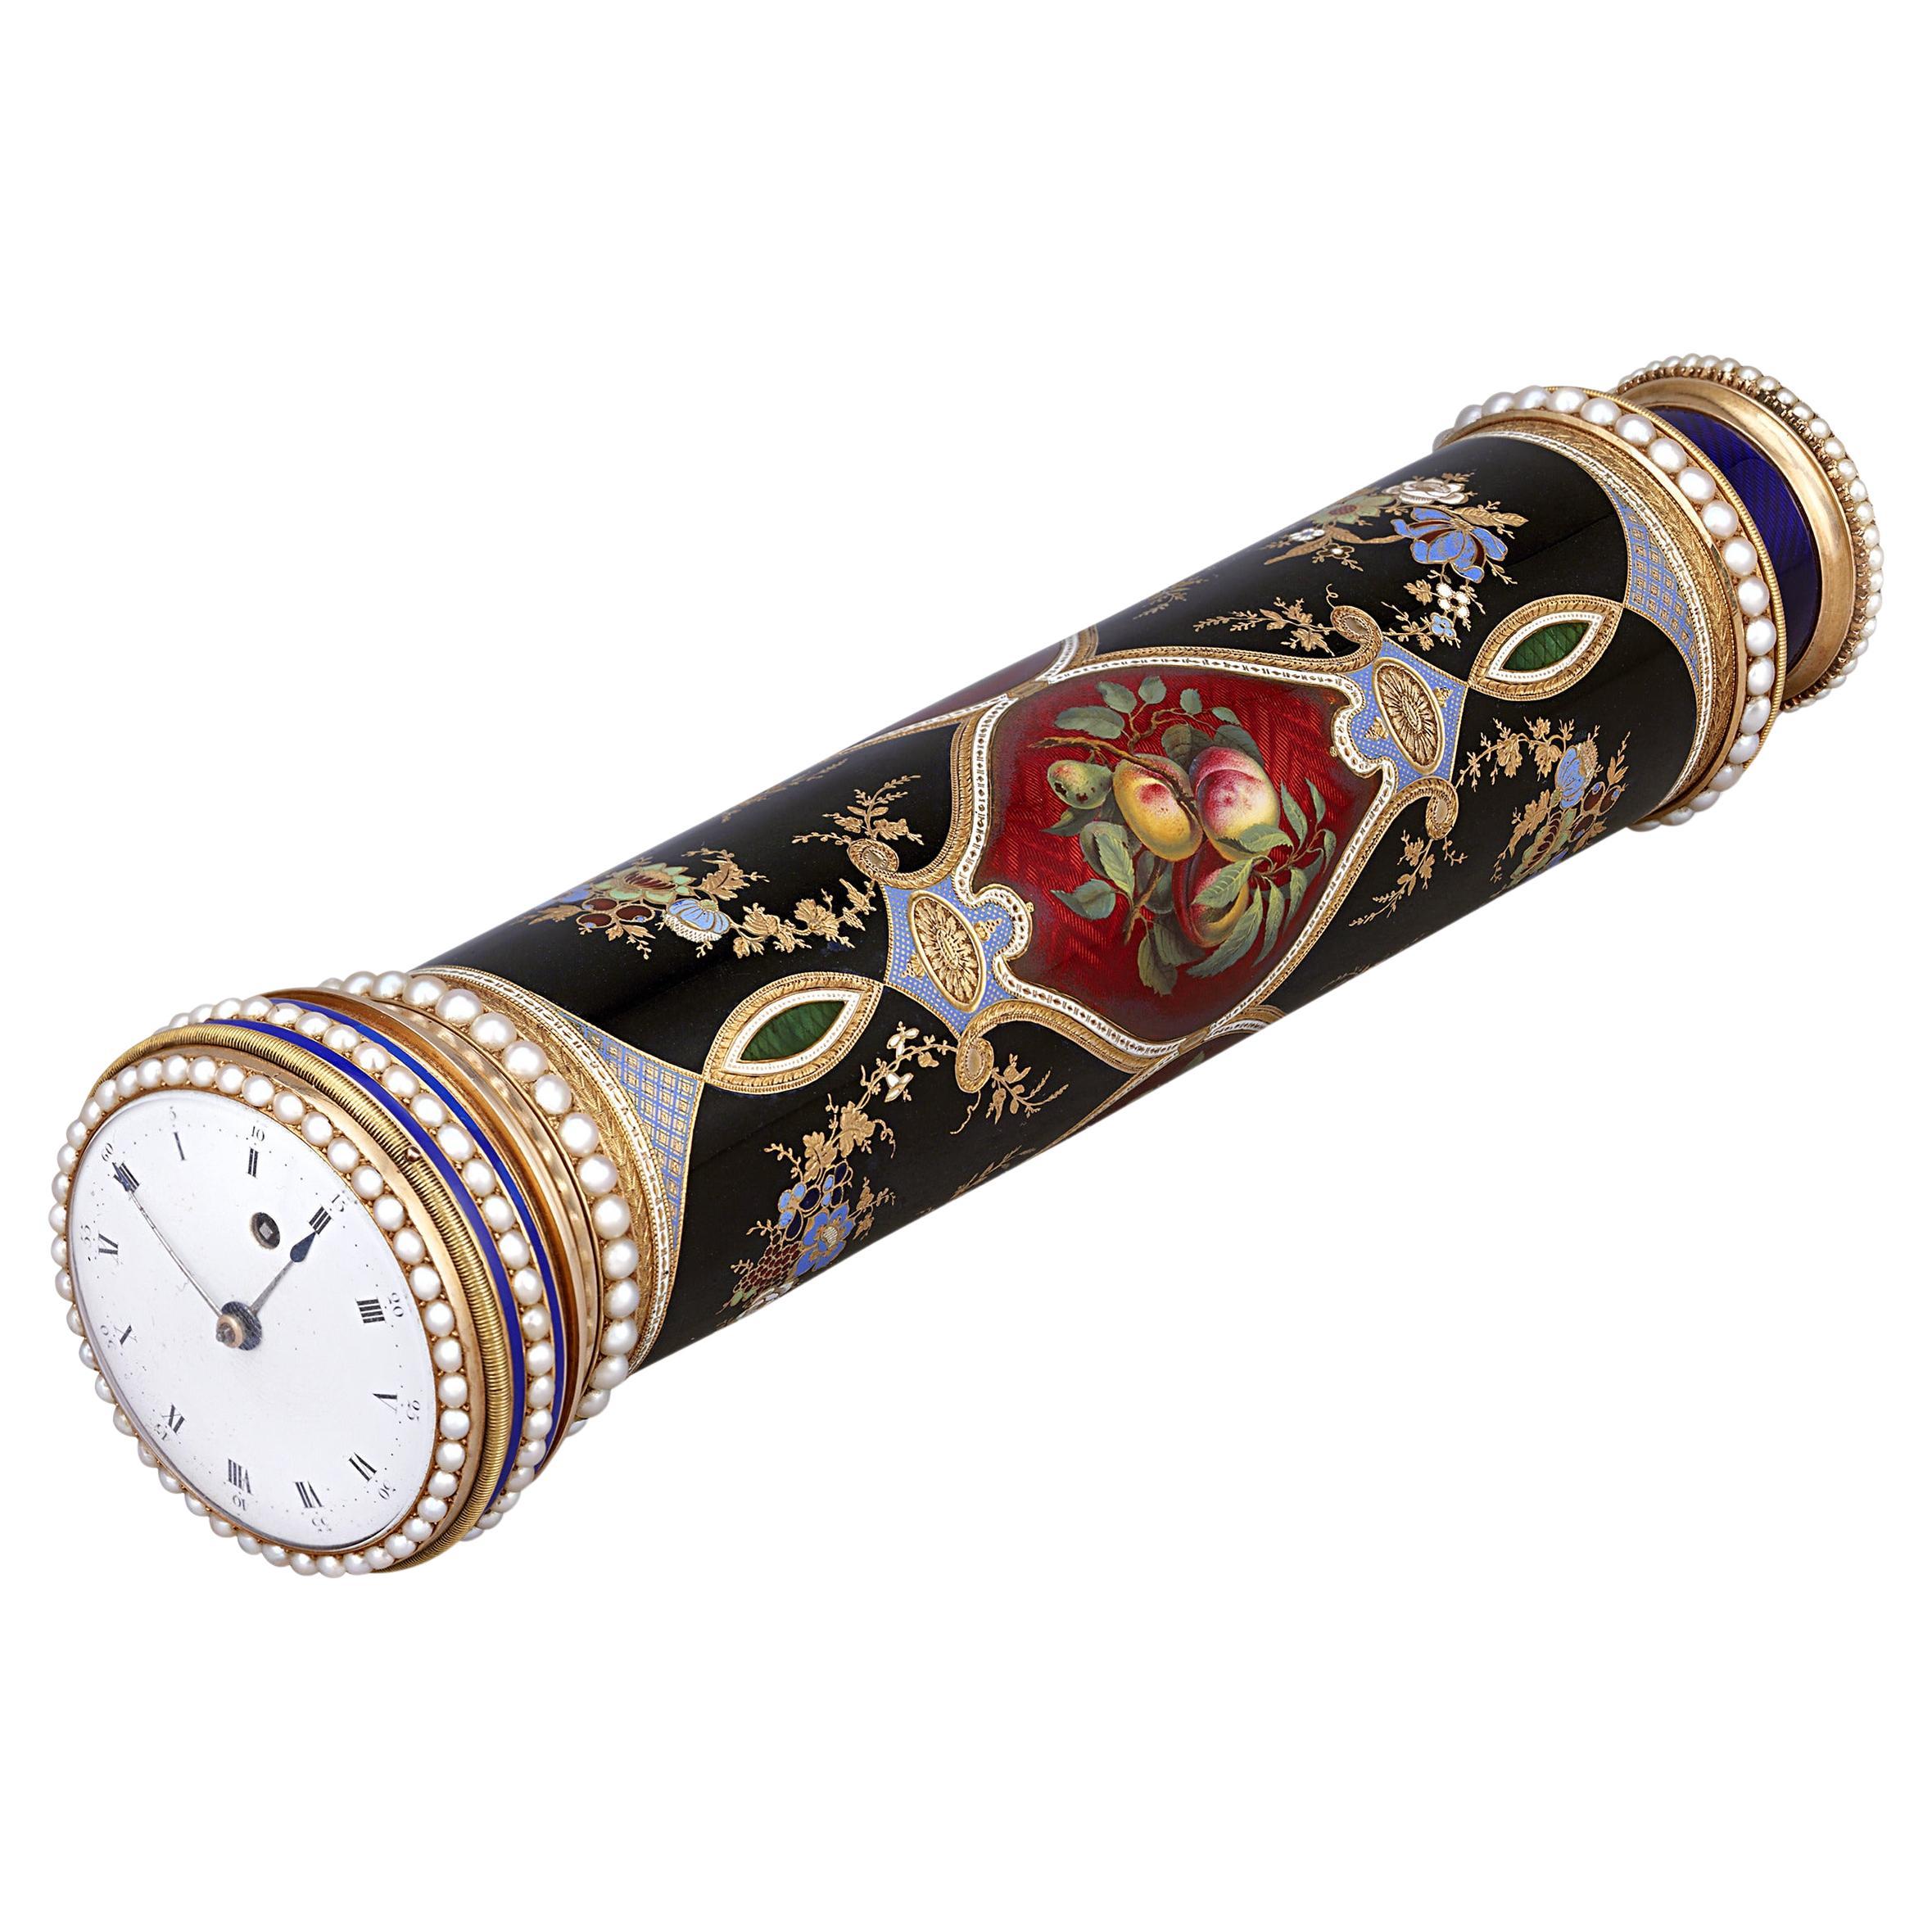 Swiss Enamel and Gold Telescope with Pocket Watch